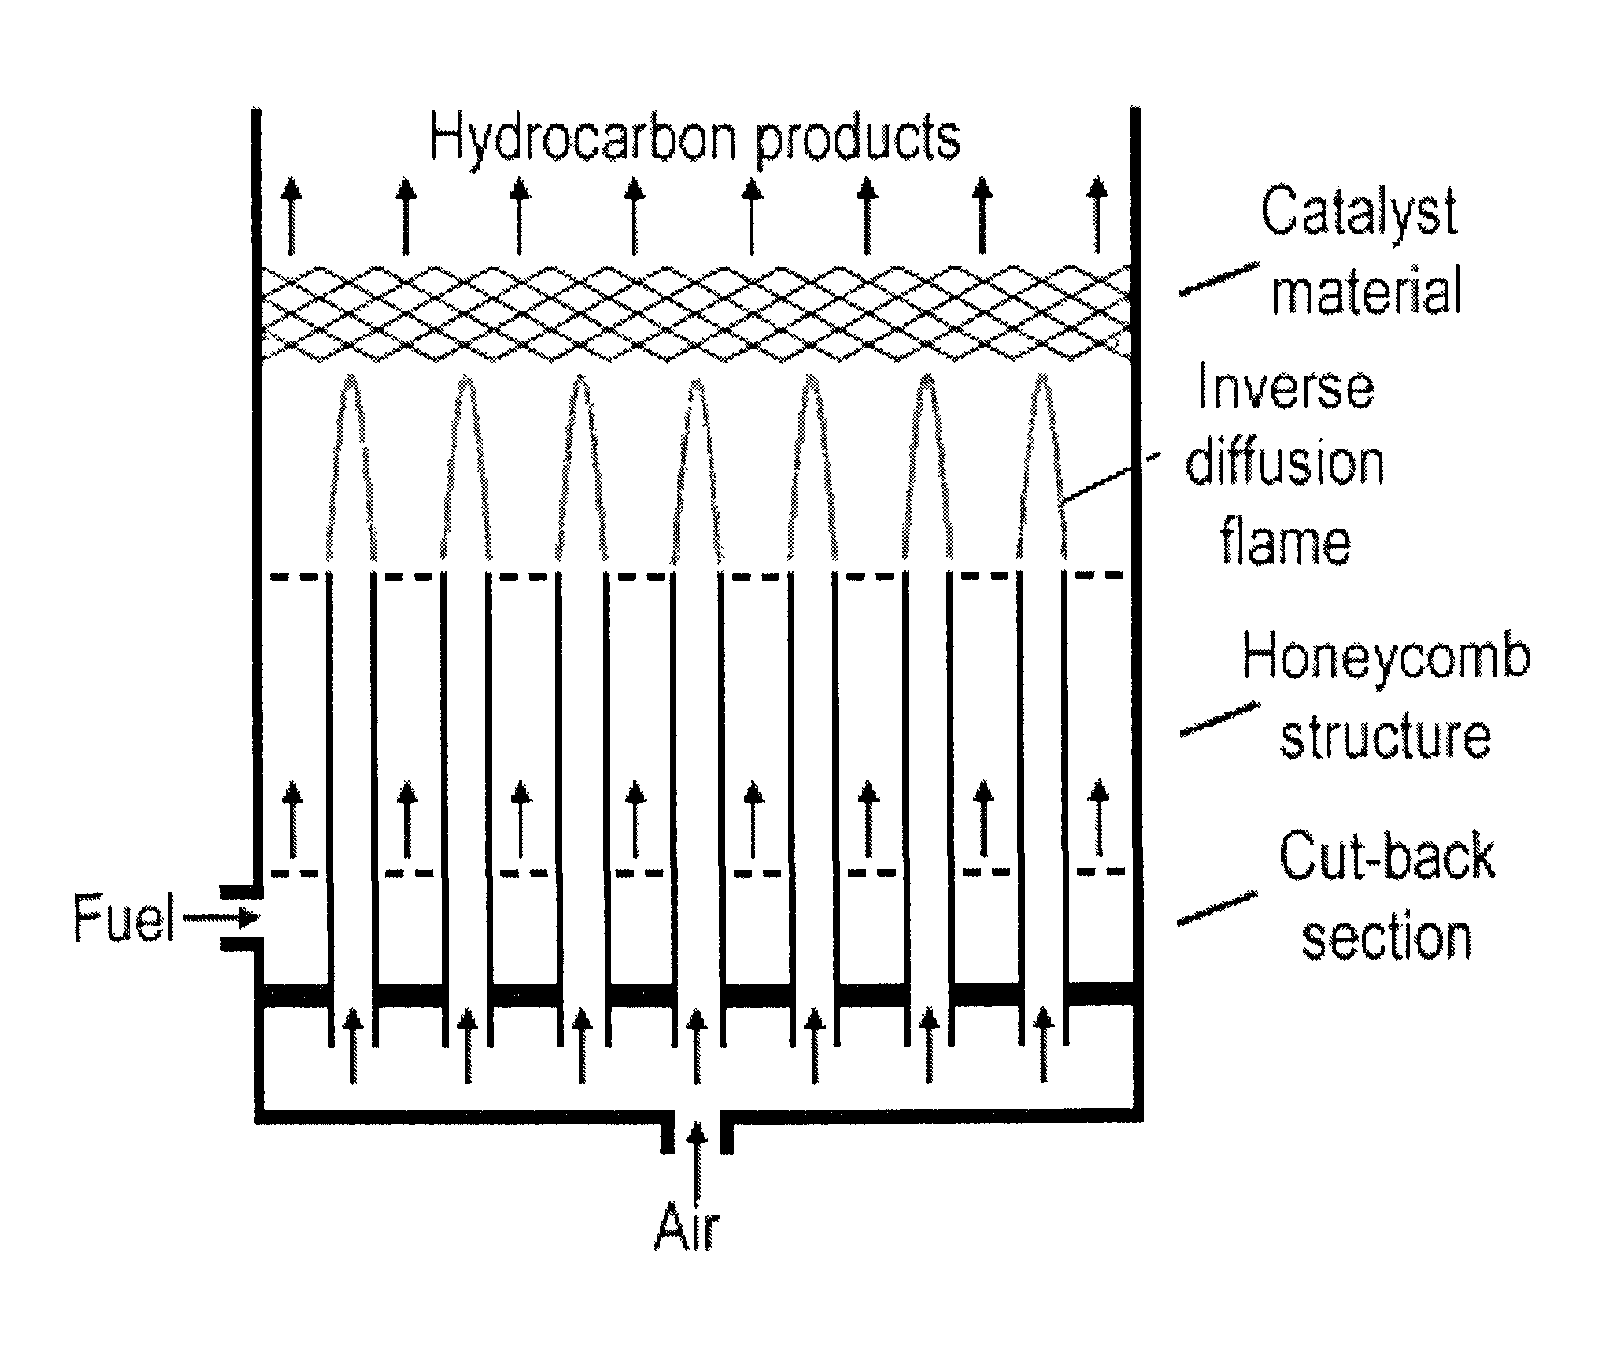 Scalable multiple-inverse diffusion flame burner for synthesis and processing of carbon-based and other nanostructured materials and films and fuels